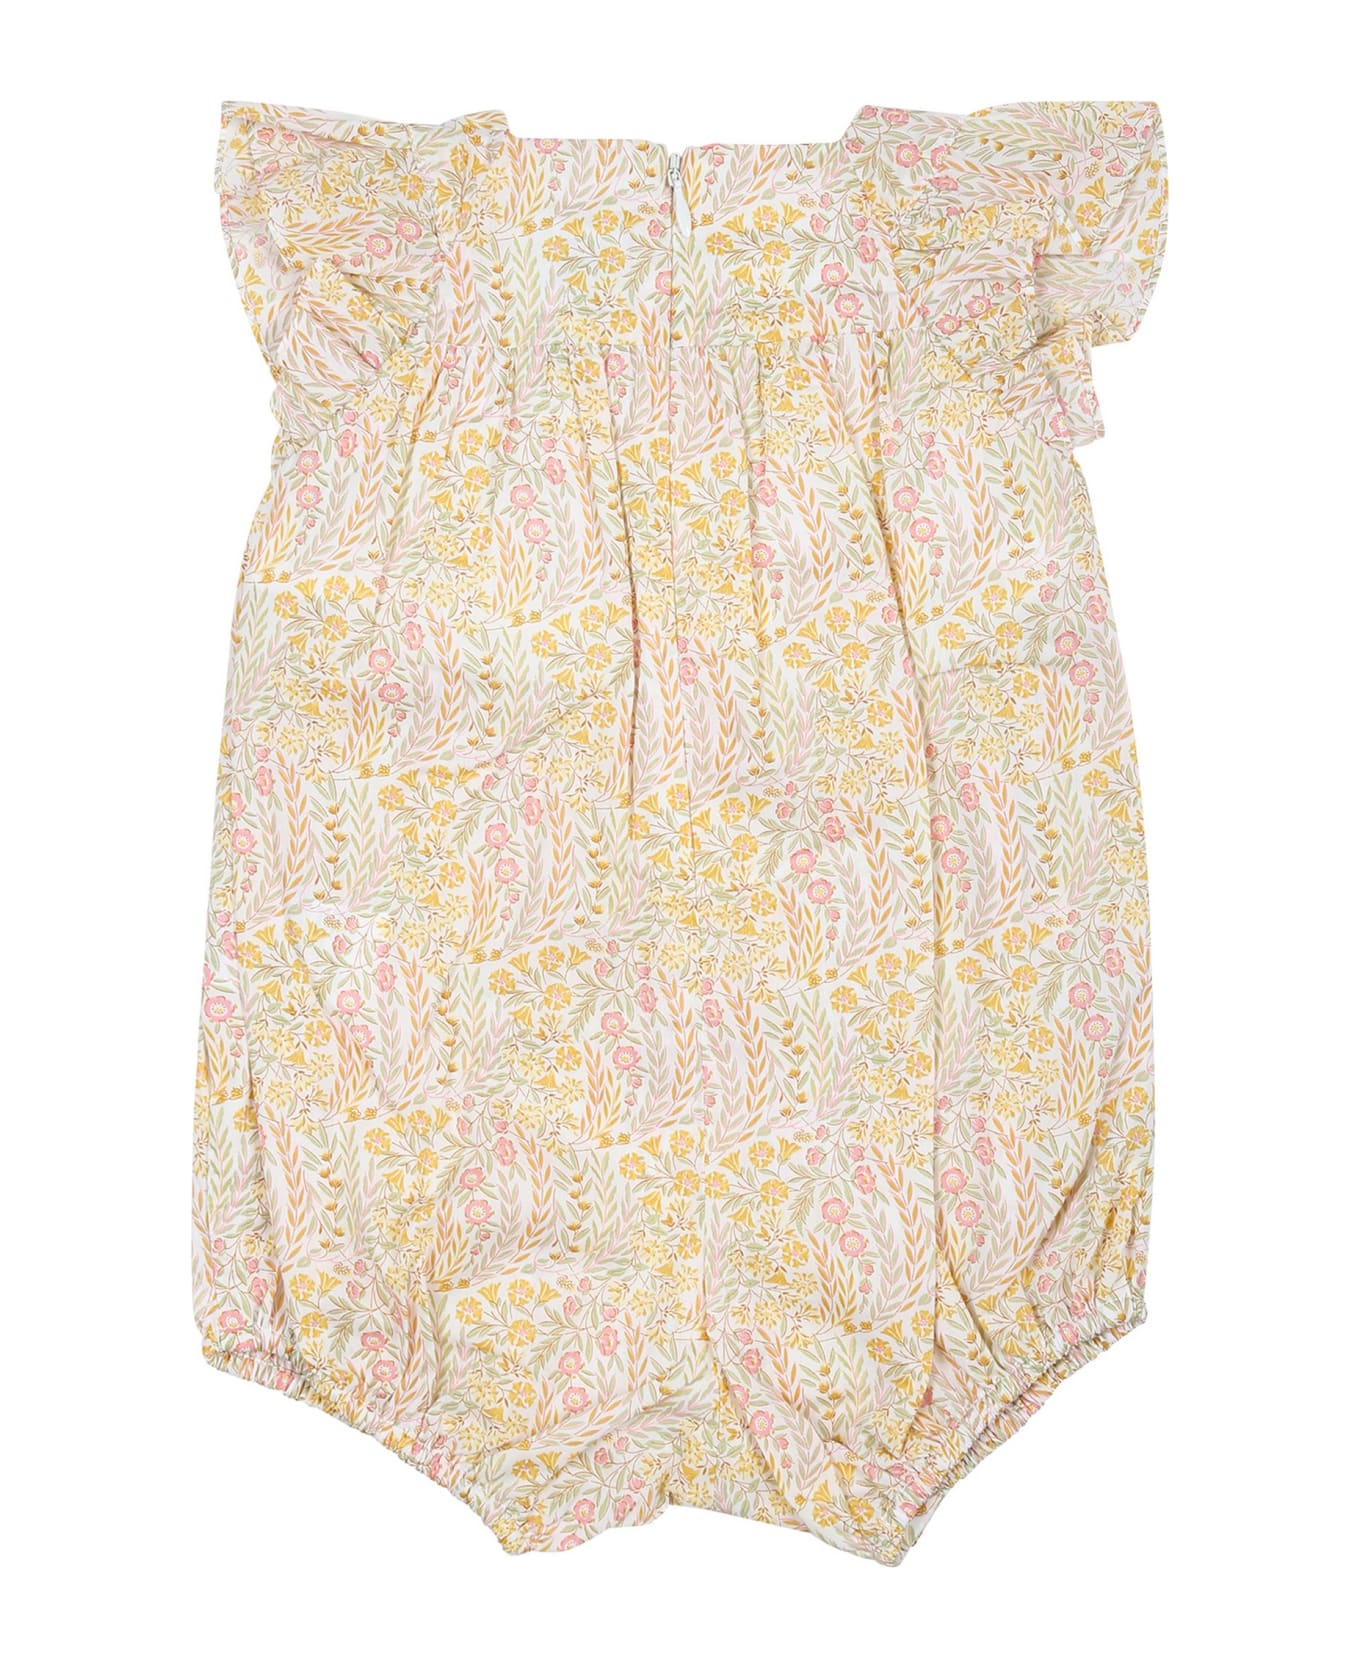 Tartine et Chocolat Ivory Romper For Baby Girl With Liberty Fabric - Ivory